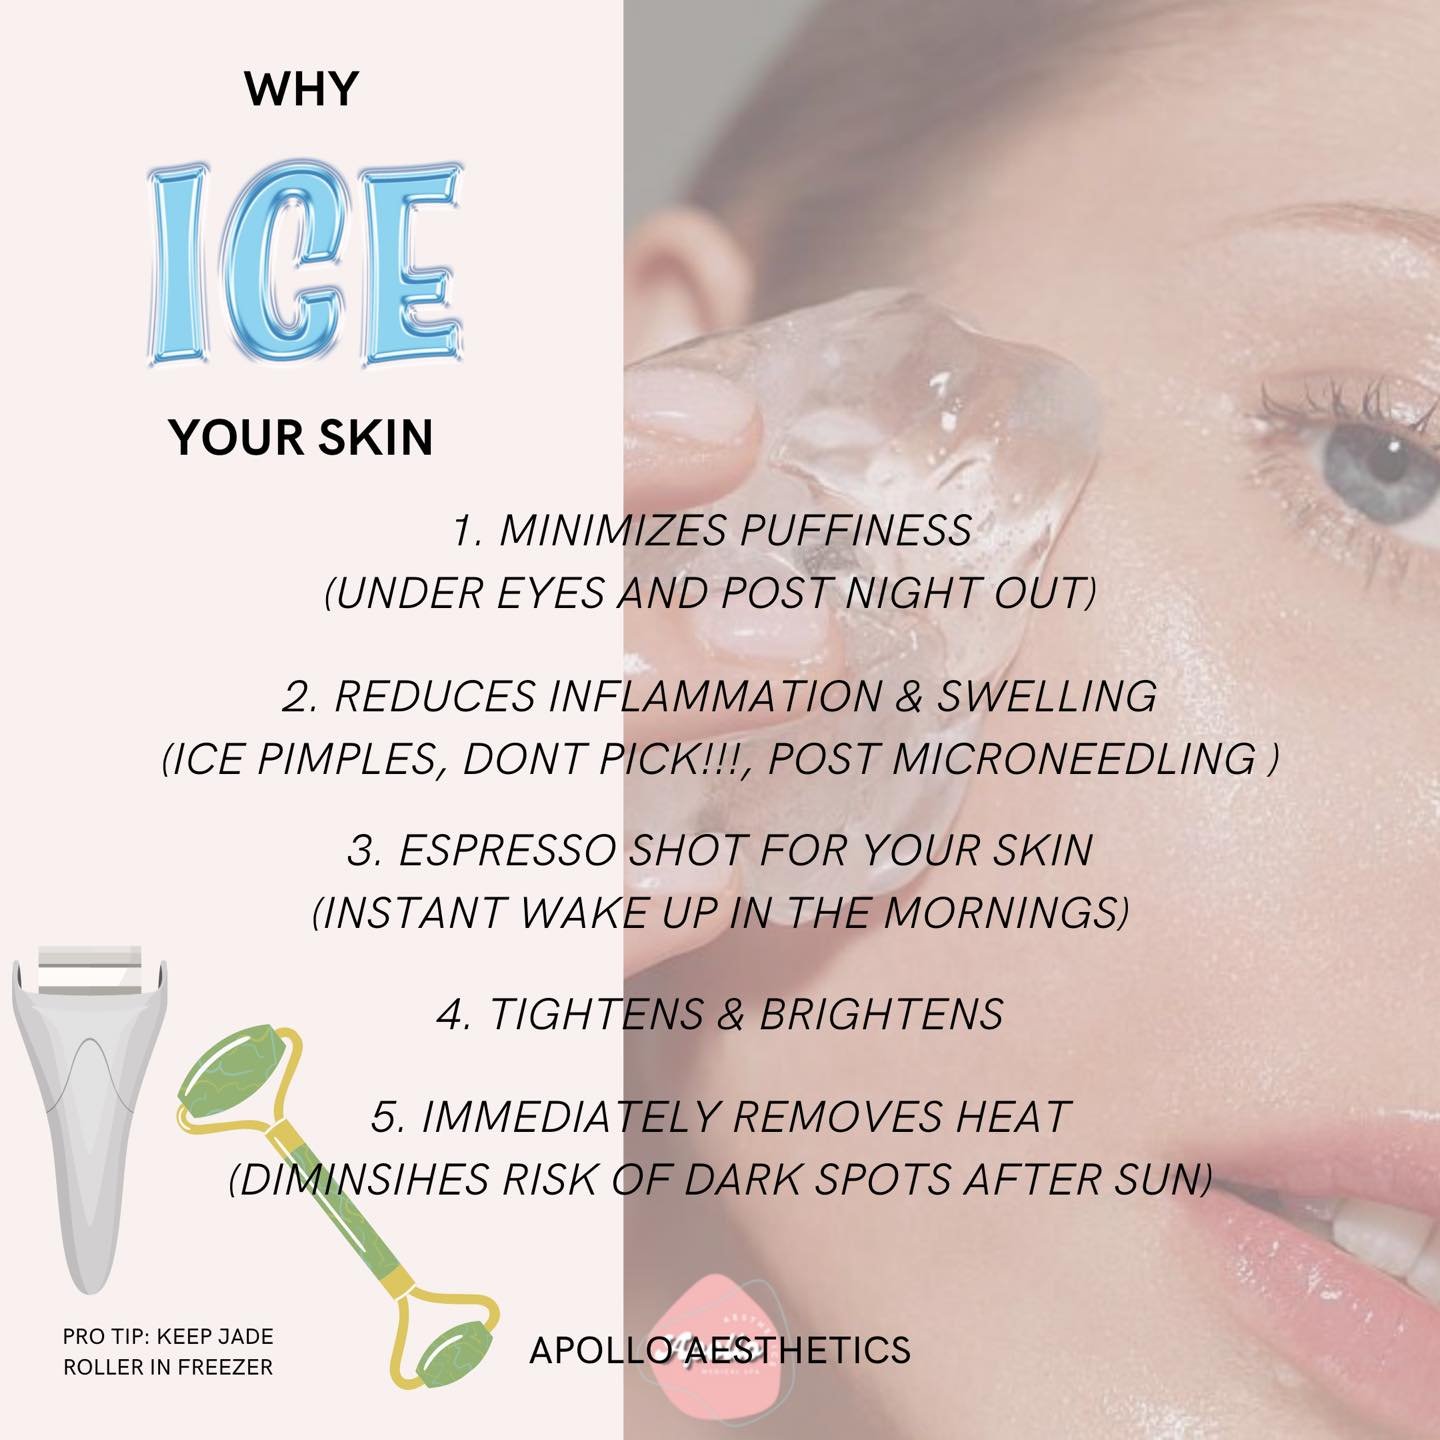 🧊 It feels amazing! Gives an instant glowing effect, minimizes inflamed pimples, and de-puffs!
Try it with a jade roller or actual ice roller in the freezer. If you don&rsquo;t have either, use a piece of ice. 
I recommend using each morning after c